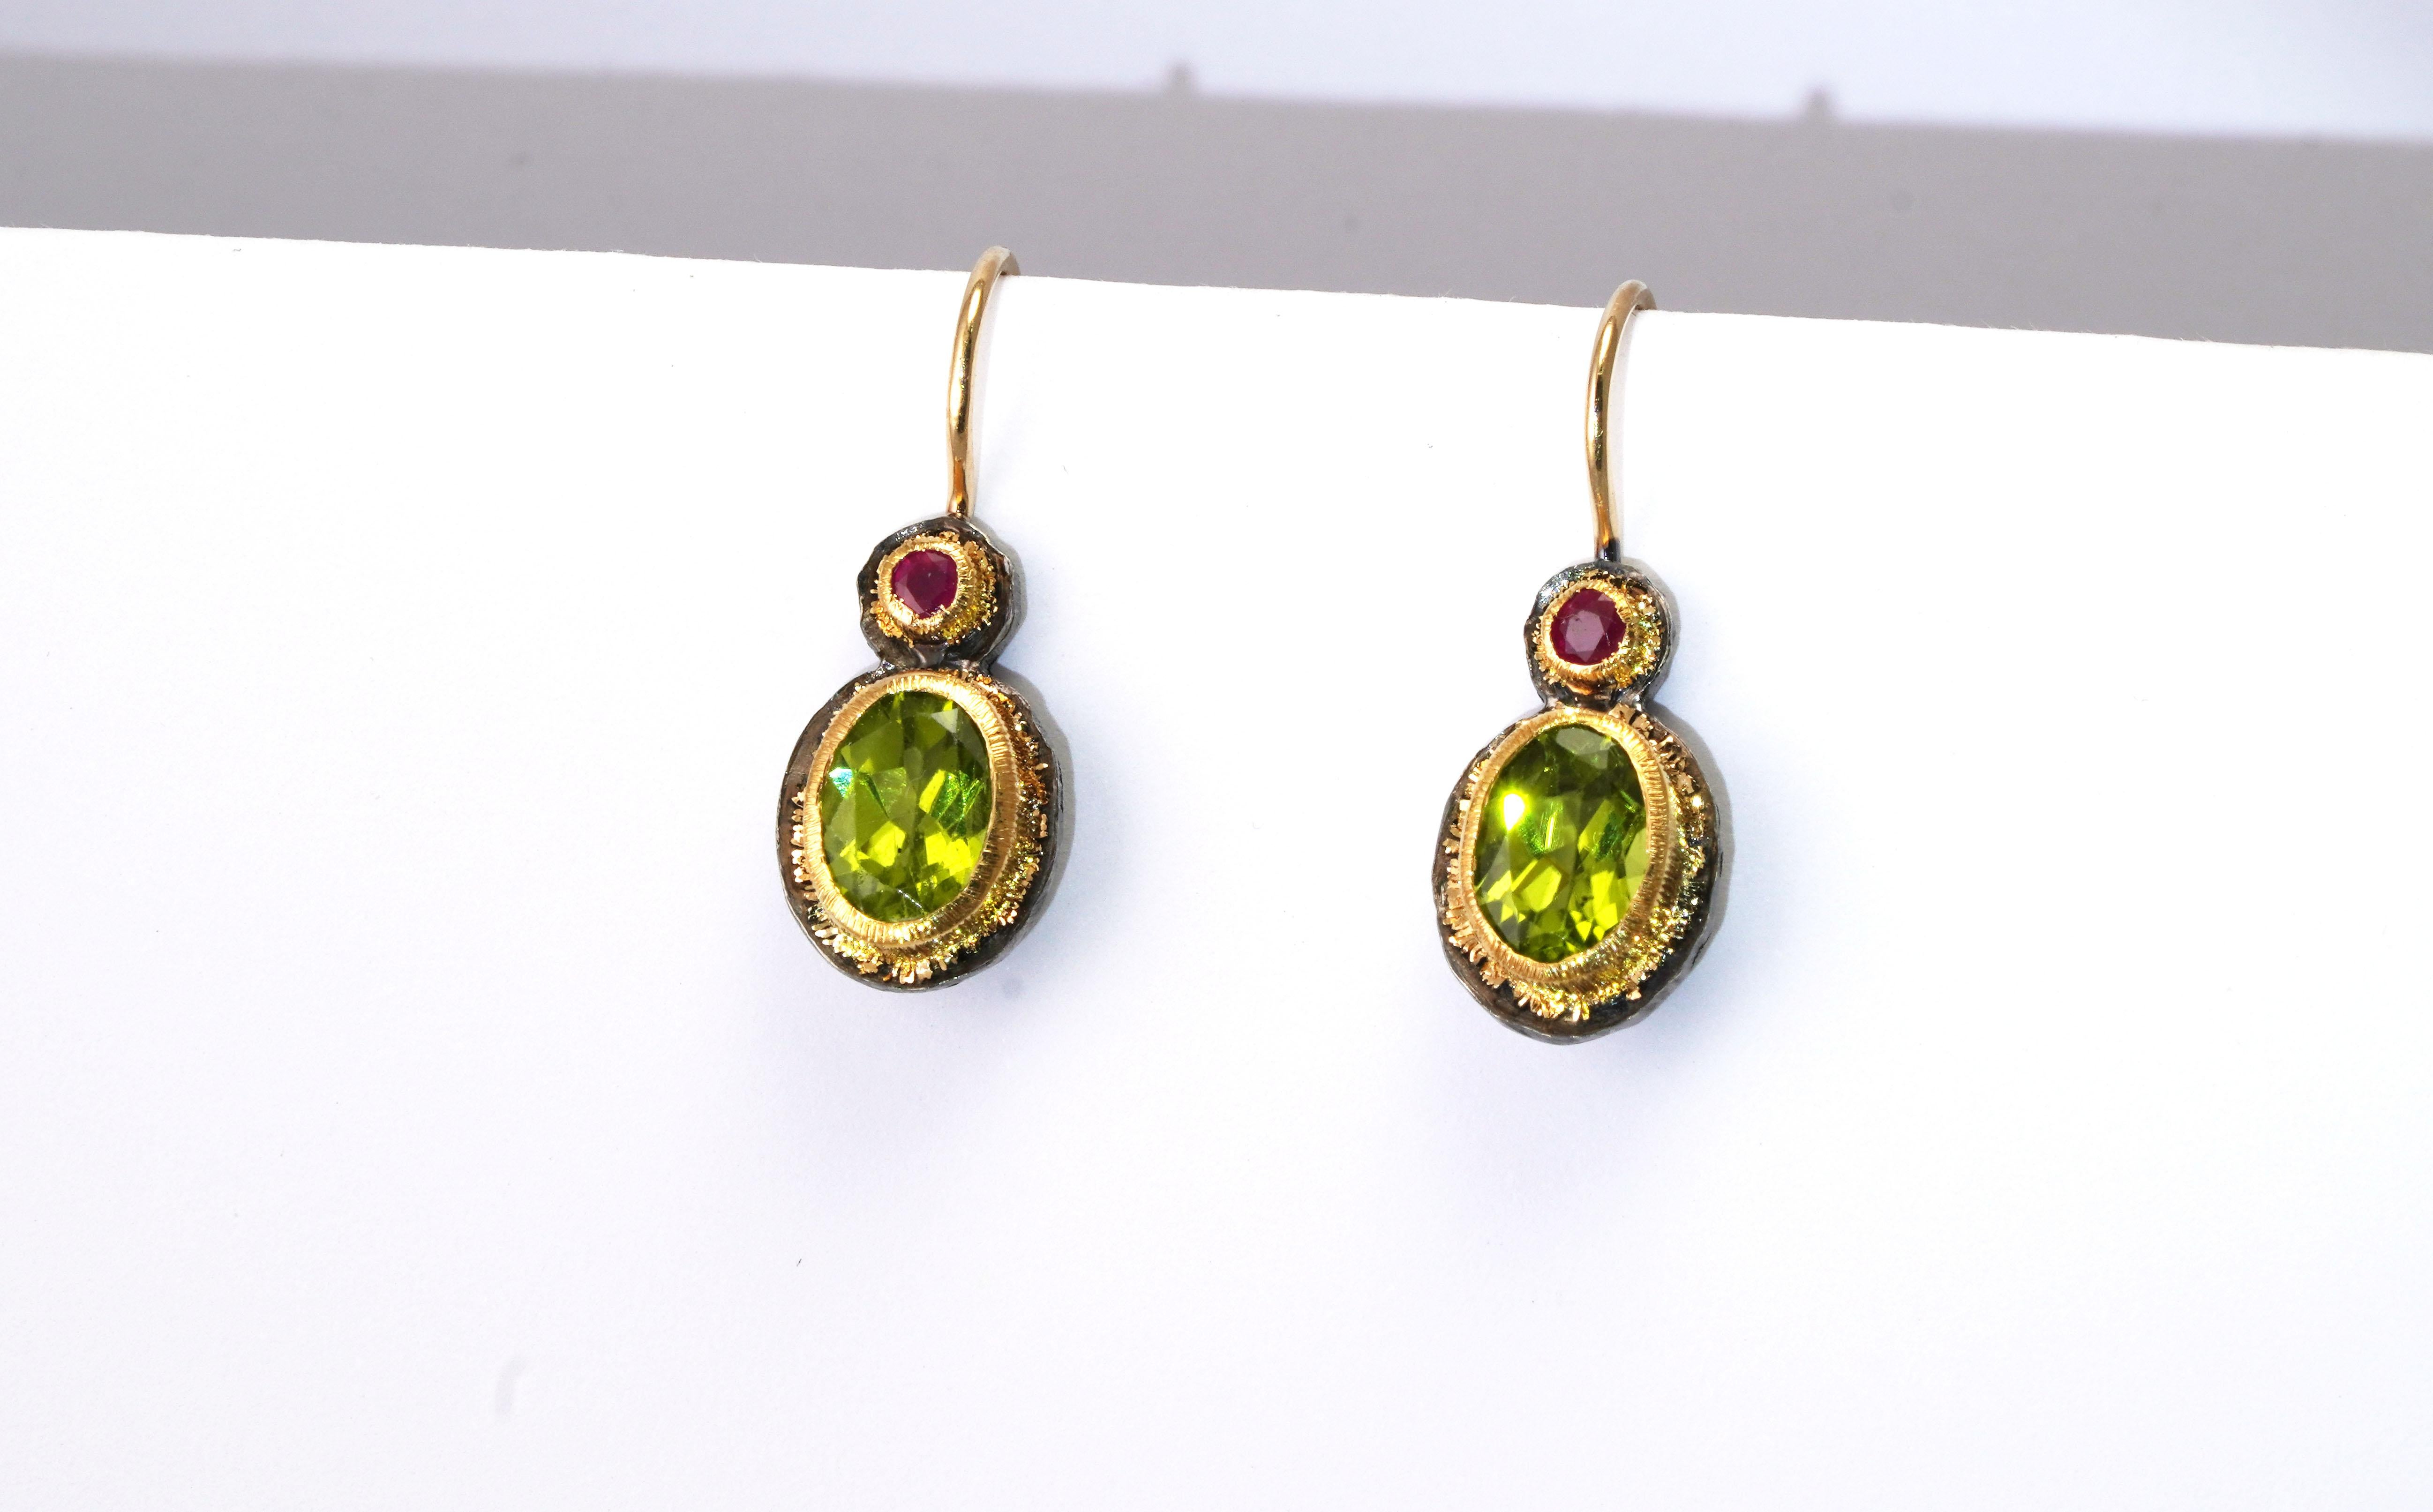 925 Oxidized Silver Earrings
Gold kt: 22 
Gold color: Yellow
Dimensions: 25 mm length
Total weight: 3.31 grams

Set with:
- Peridot
Cut: Mixed
Total weight: 2.90 carats (total)
Color: Green
- Ruby
Cut: Mixed
Total weight: 0.14 carat
Color: Red